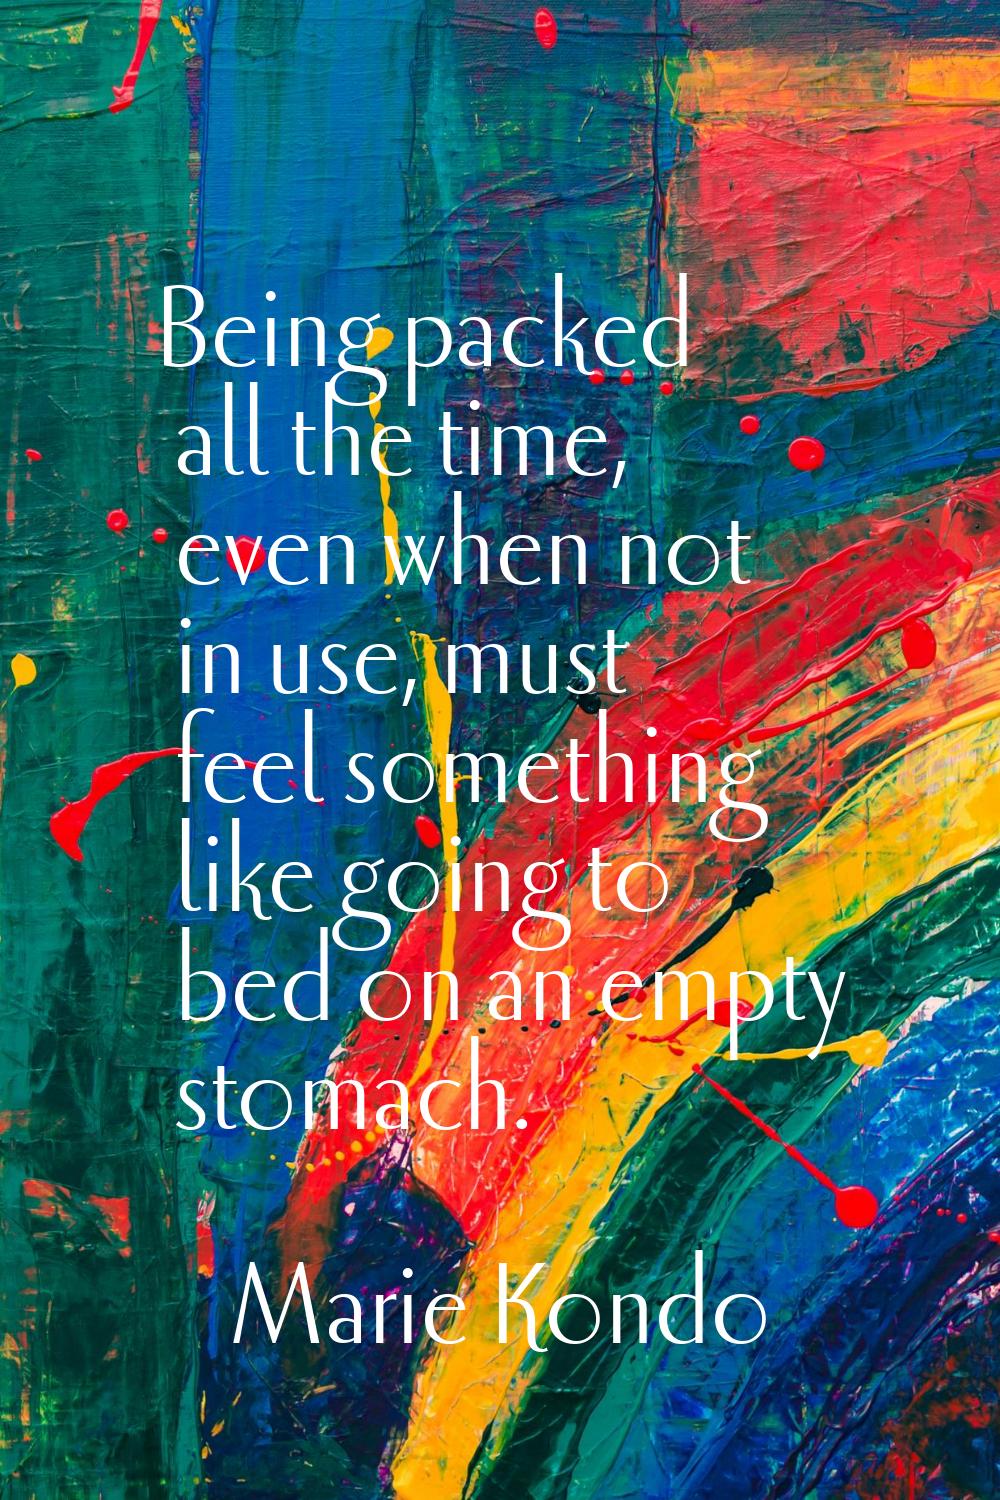 Being packed all the time, even when not in use, must feel something like going to bed on an empty 